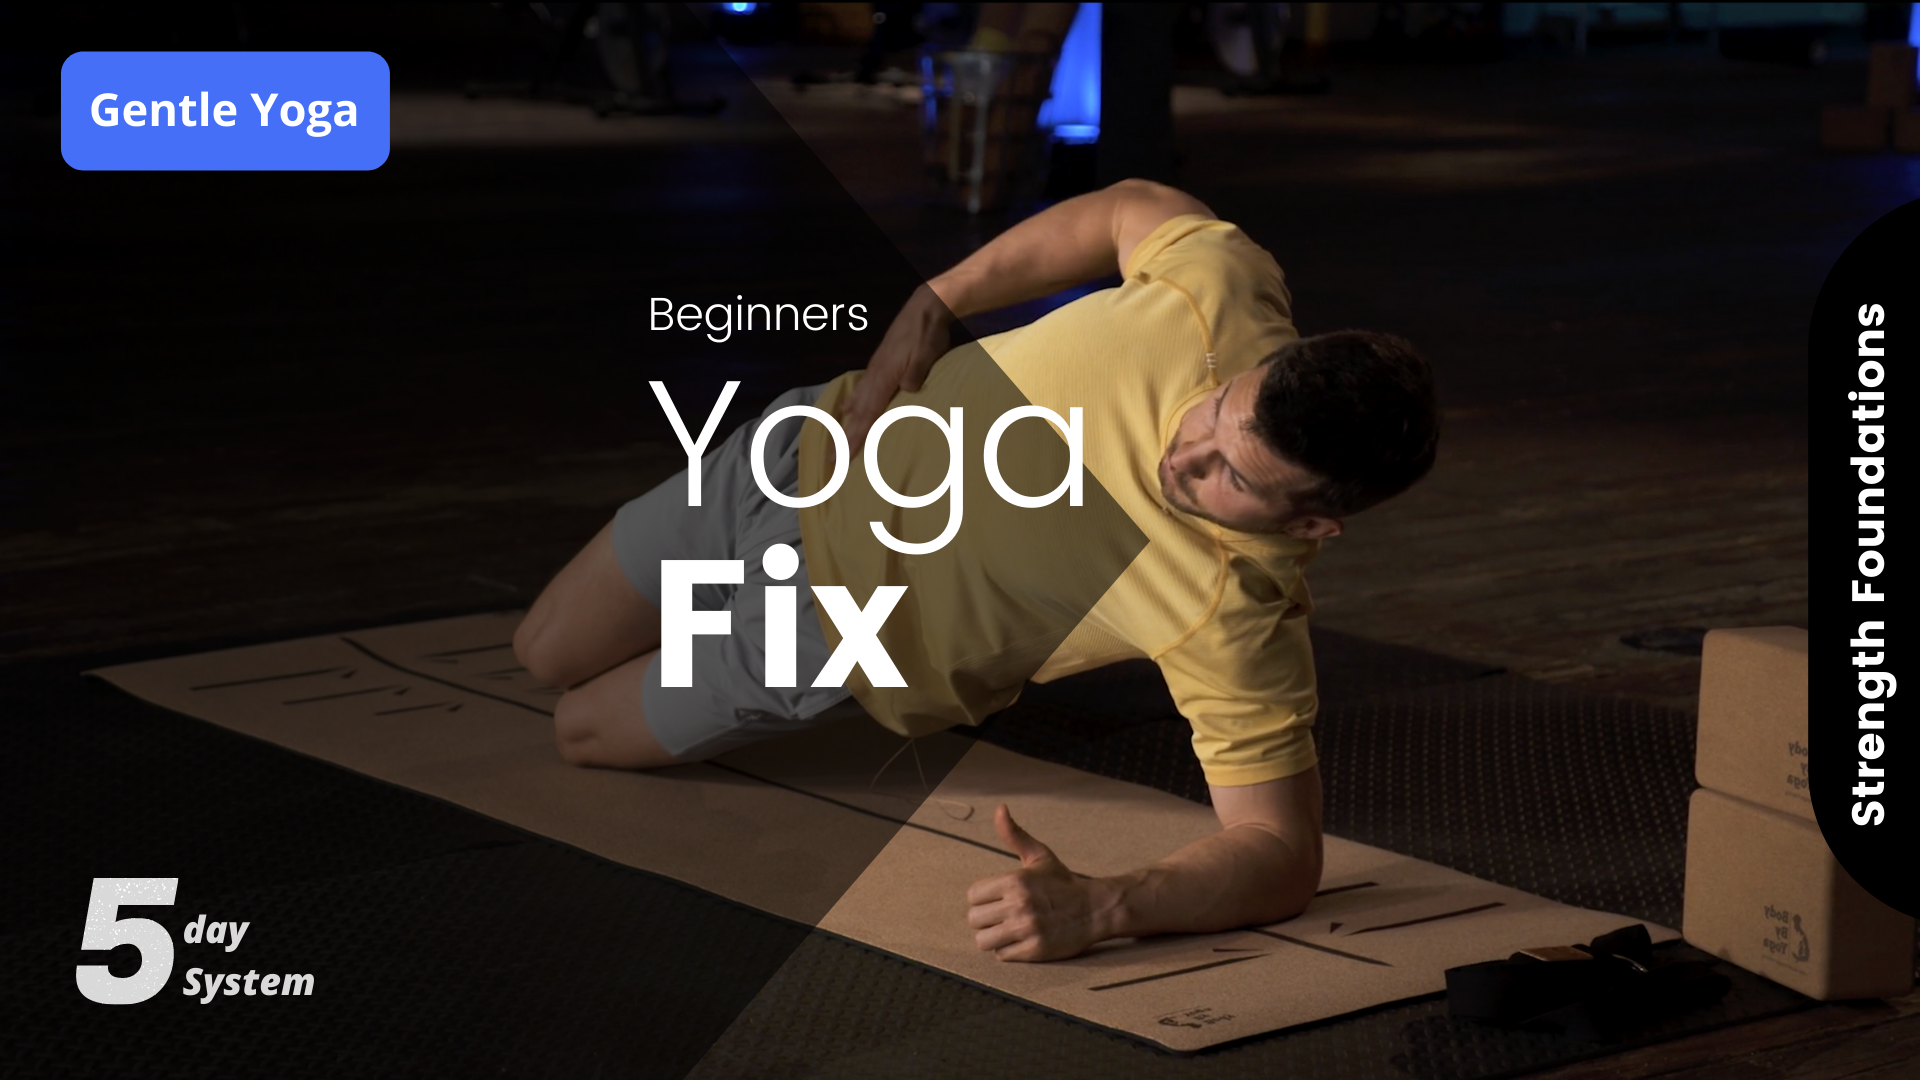 Absolute　System　Yoga　and　Yoga　Pain　For　Mobility　Fix　Beginners　Gentle　For　Strength,　Relief,